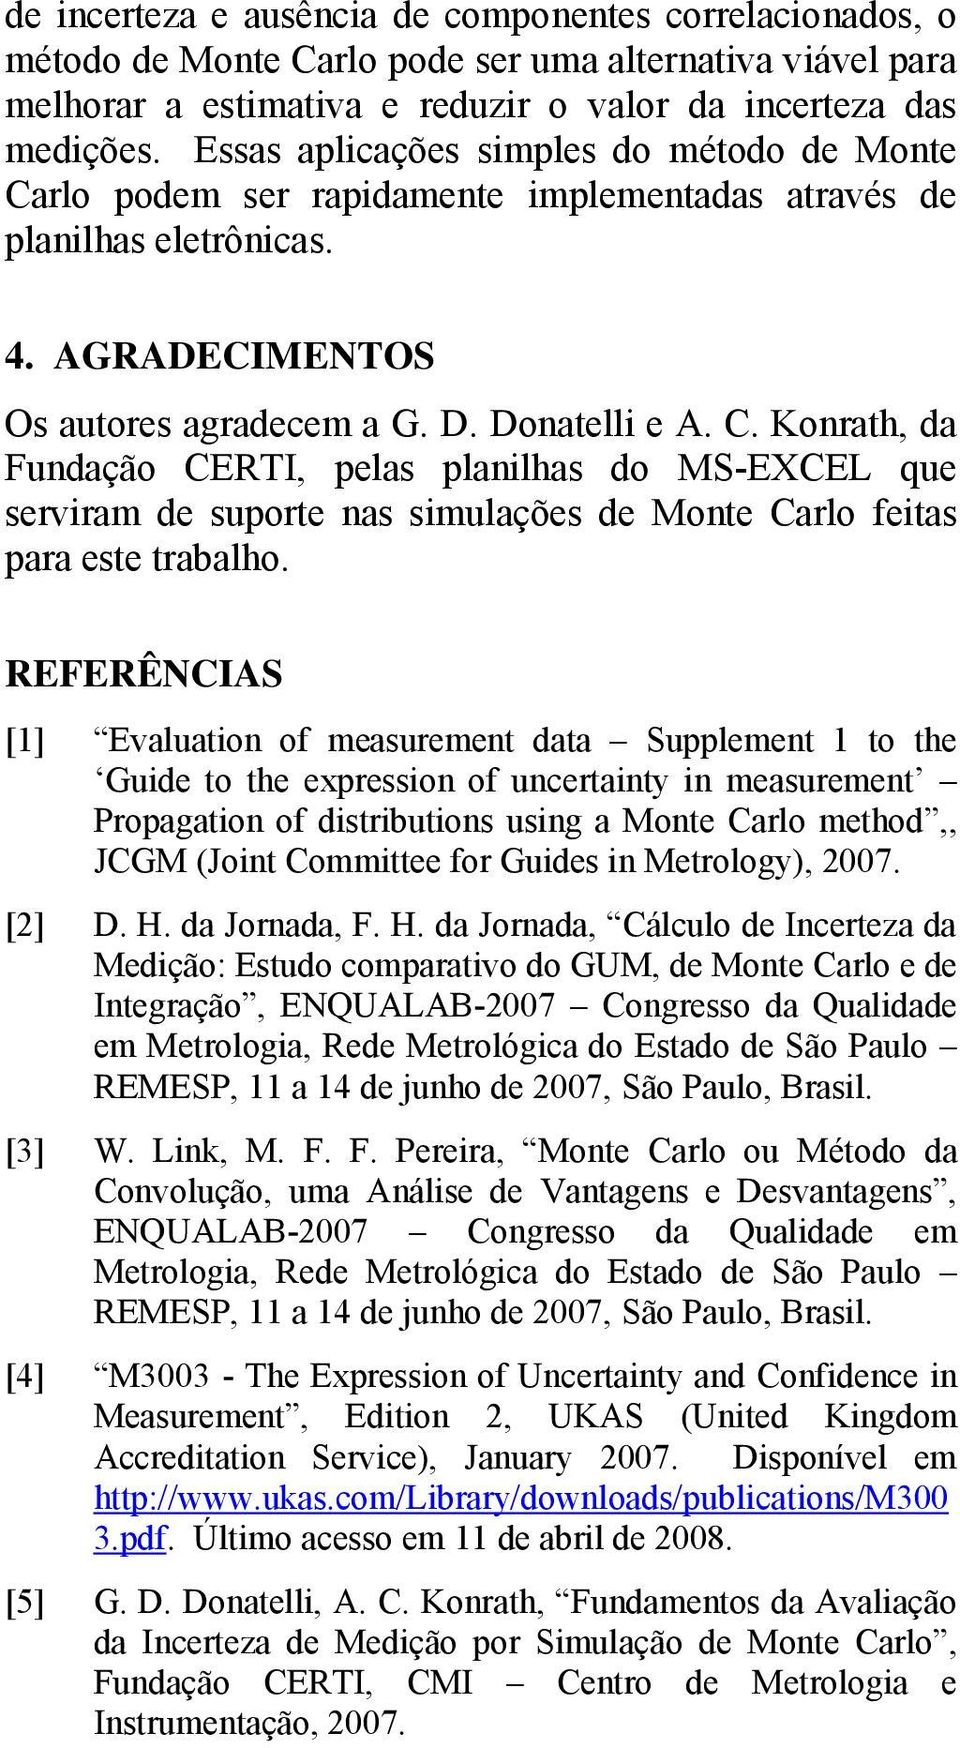 REFERÊNCIAS [] Evaluation of measurement data Supplement to the Guide to the expression of uncertainty in measurement Propagation of distributions using a Monte Carlo method,, JCGM (Joint Committee